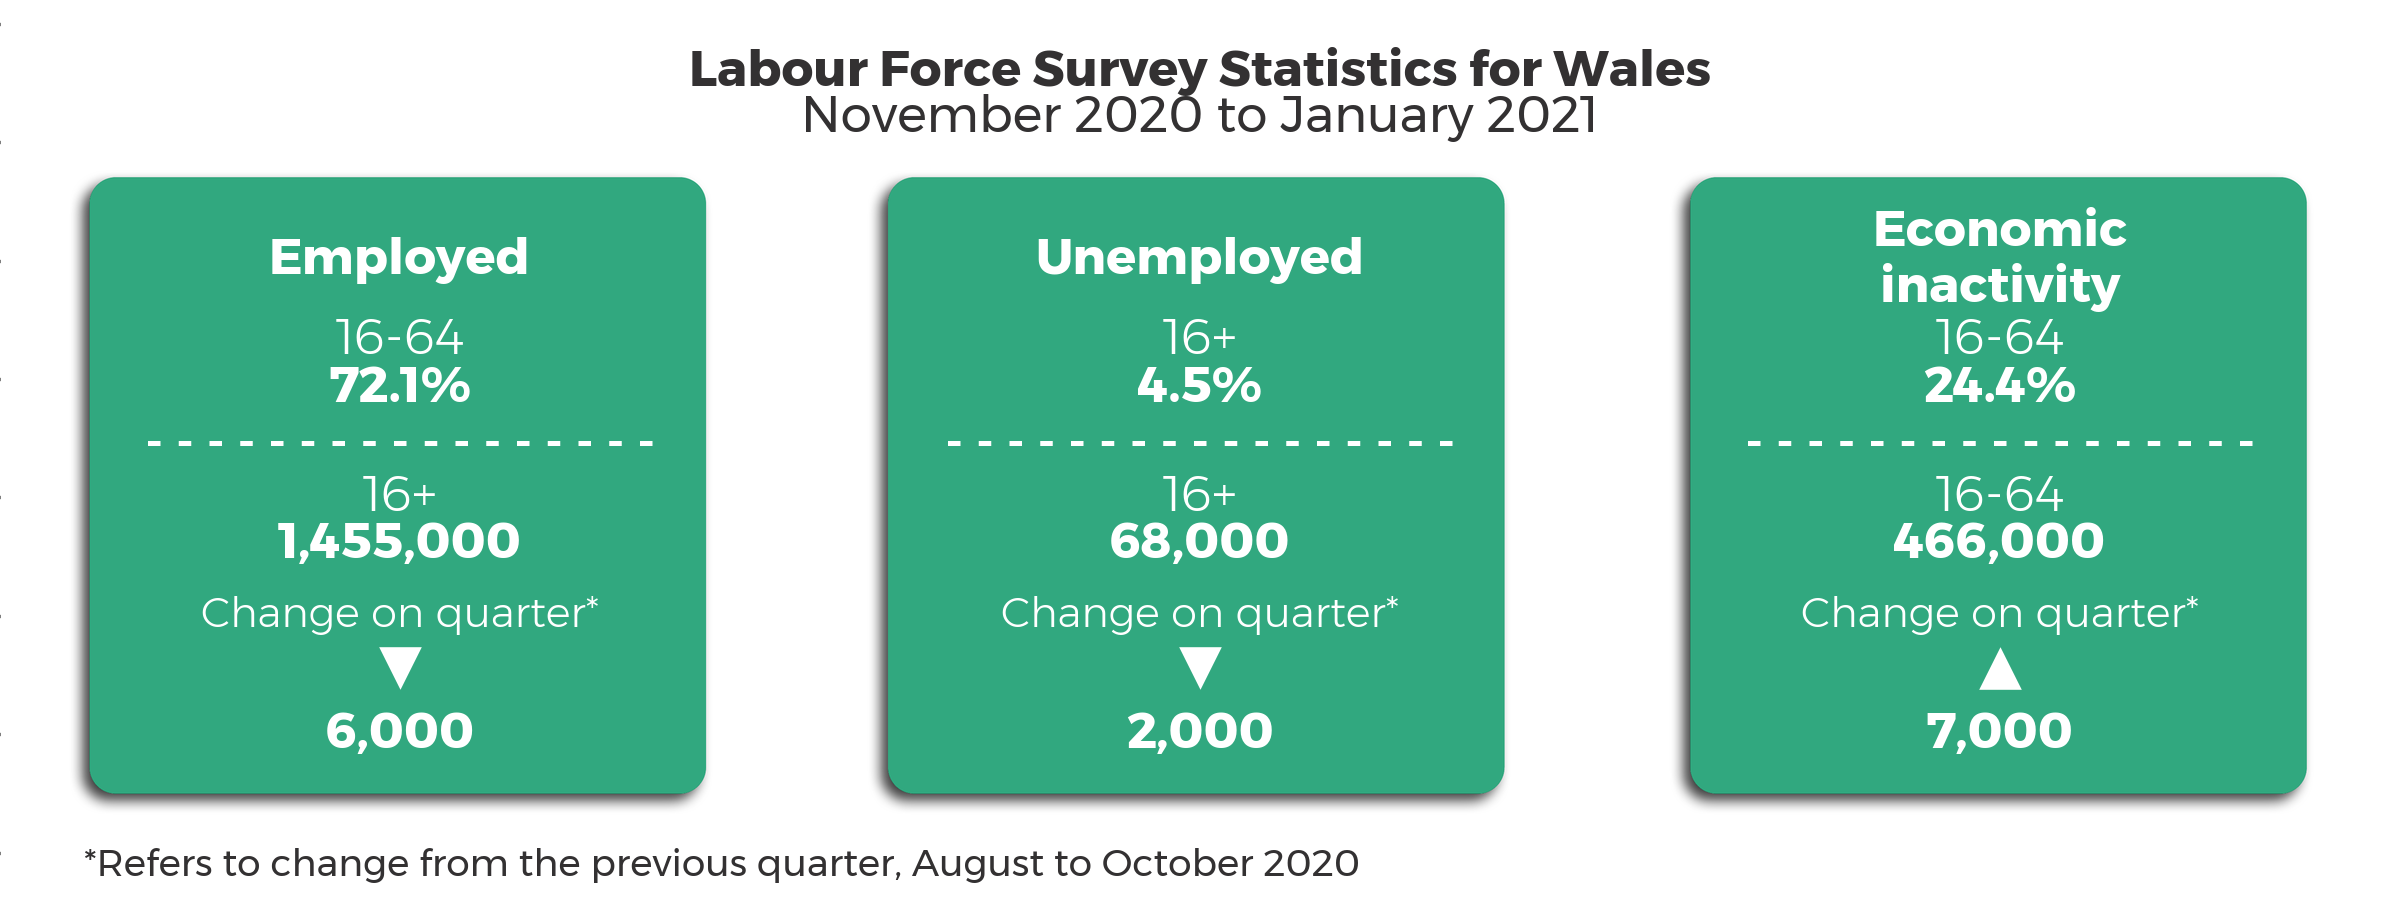 Headline statistics November 2020 to January 2021 compared to the previous quarter August to October 2020. The 16+ unemployment rate is 4.5% with 68,000 people unemployed, a decrease of 2,000 from the previous quarter. The 16-64 employment rate is 72.1%. 1,455,000 people aged 16+ employed, a decrease of 6,000 from the previous quarter. The 16-64 economic inactivity rate is 24.4% with 466,000 people economically active, an increase of 7,000 on the previous quarter.